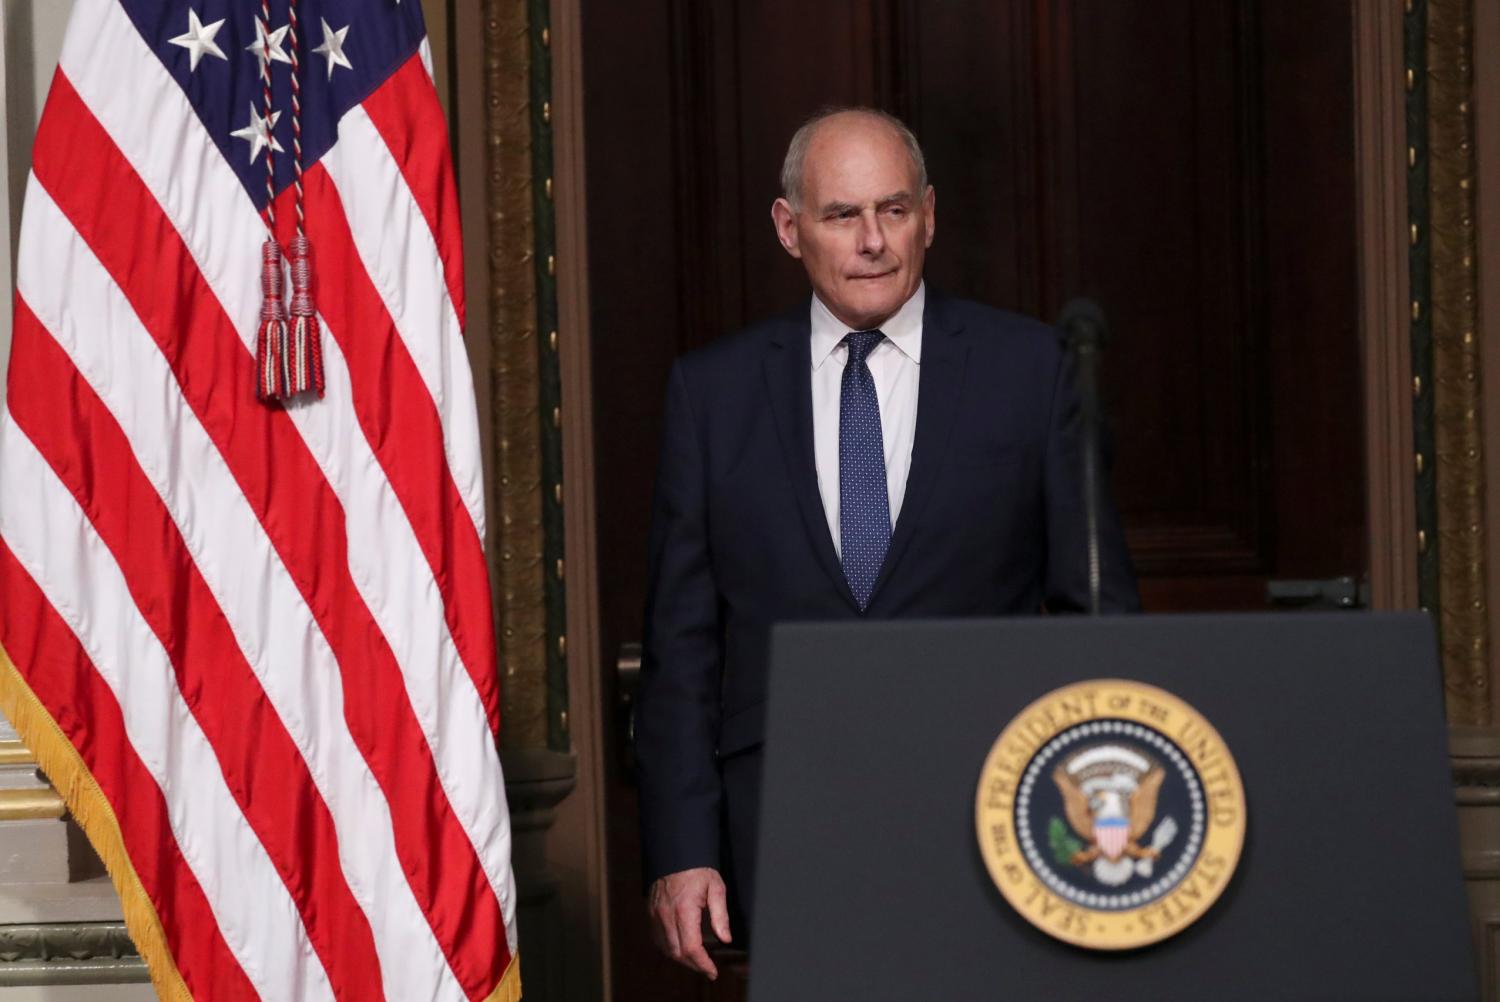 White House Chief of Staff John Kelly arrives for the Interagency Task Force to Monitor and Combat Trafficking in Persons annual meeting at the White House in Washington, U.S., October 11, 2018. REUTERS/Jonathan Ernst - RC1AF68C68D0